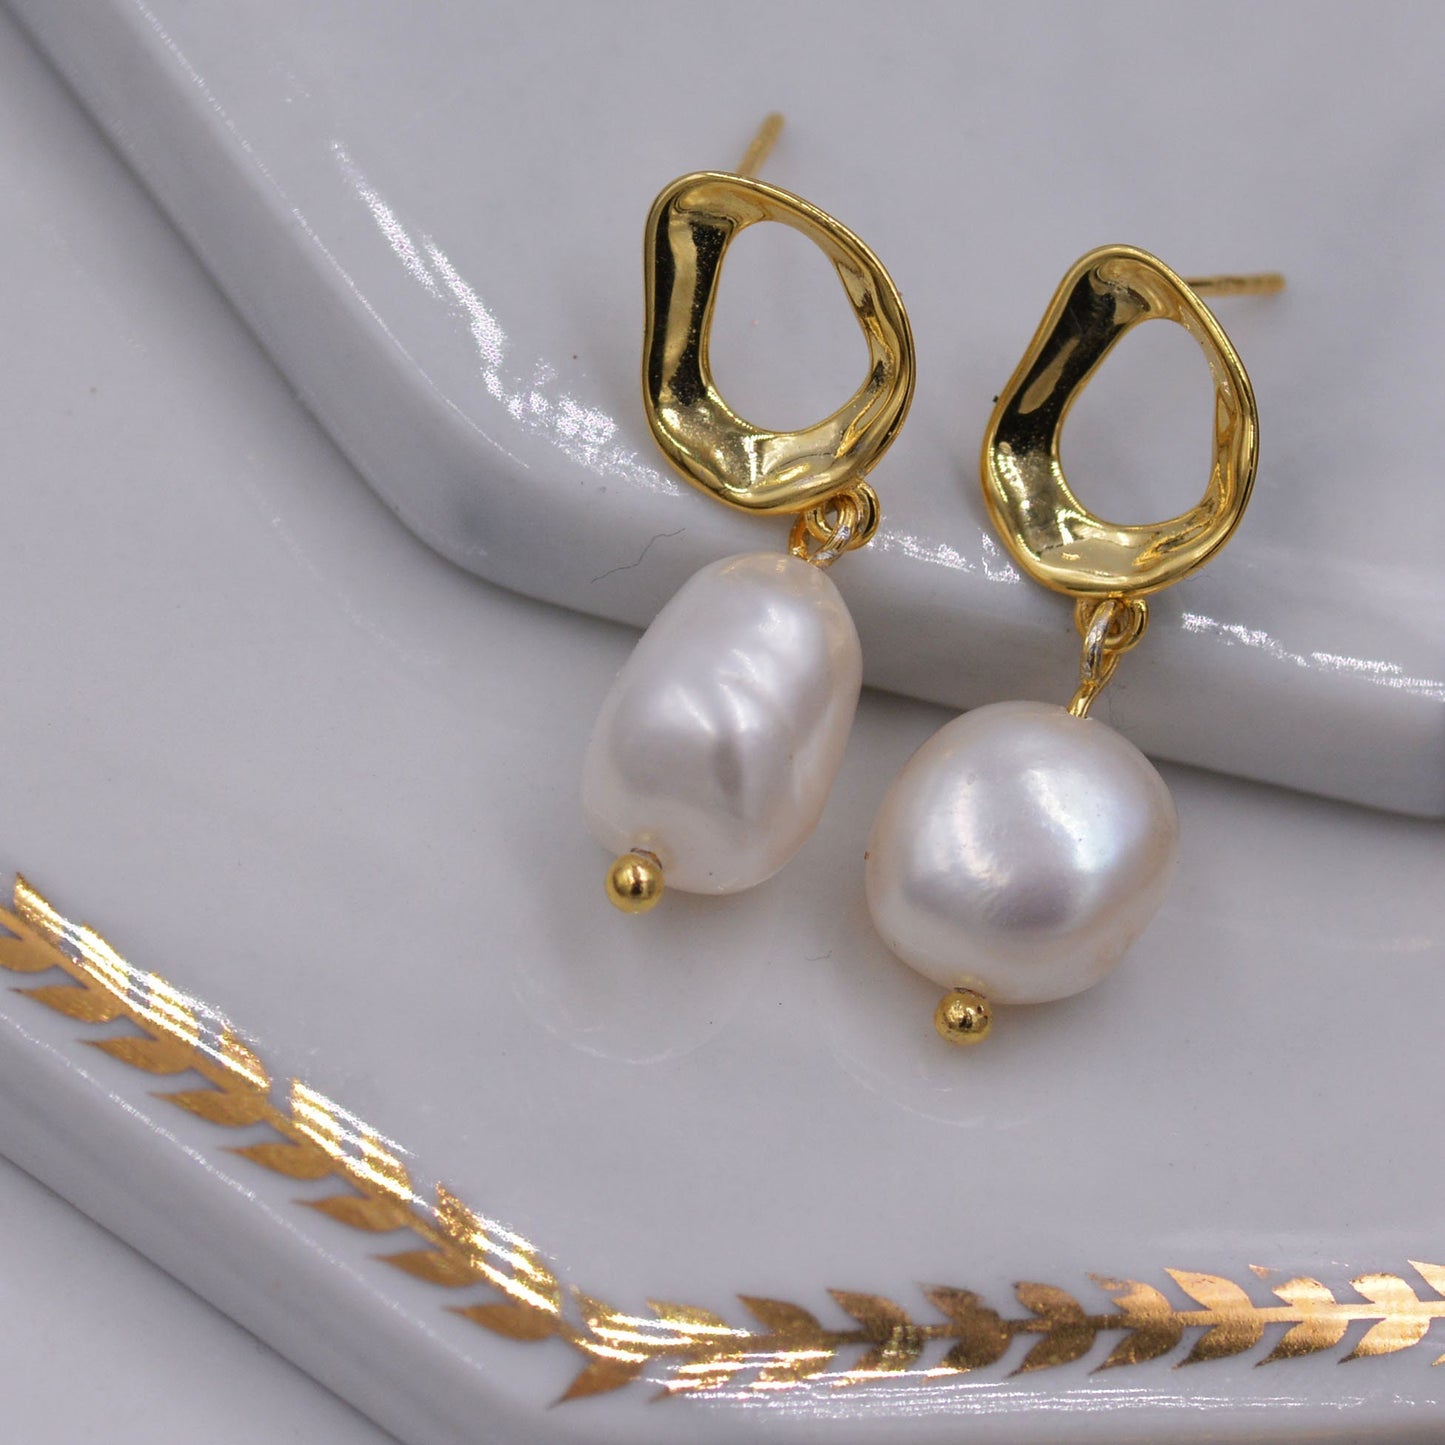 Genuine Fresh Water Pearl Drop Stud Earrings, Baroque Pearl, Sterling silver with 18ct Gold Plating, Contemporary Design